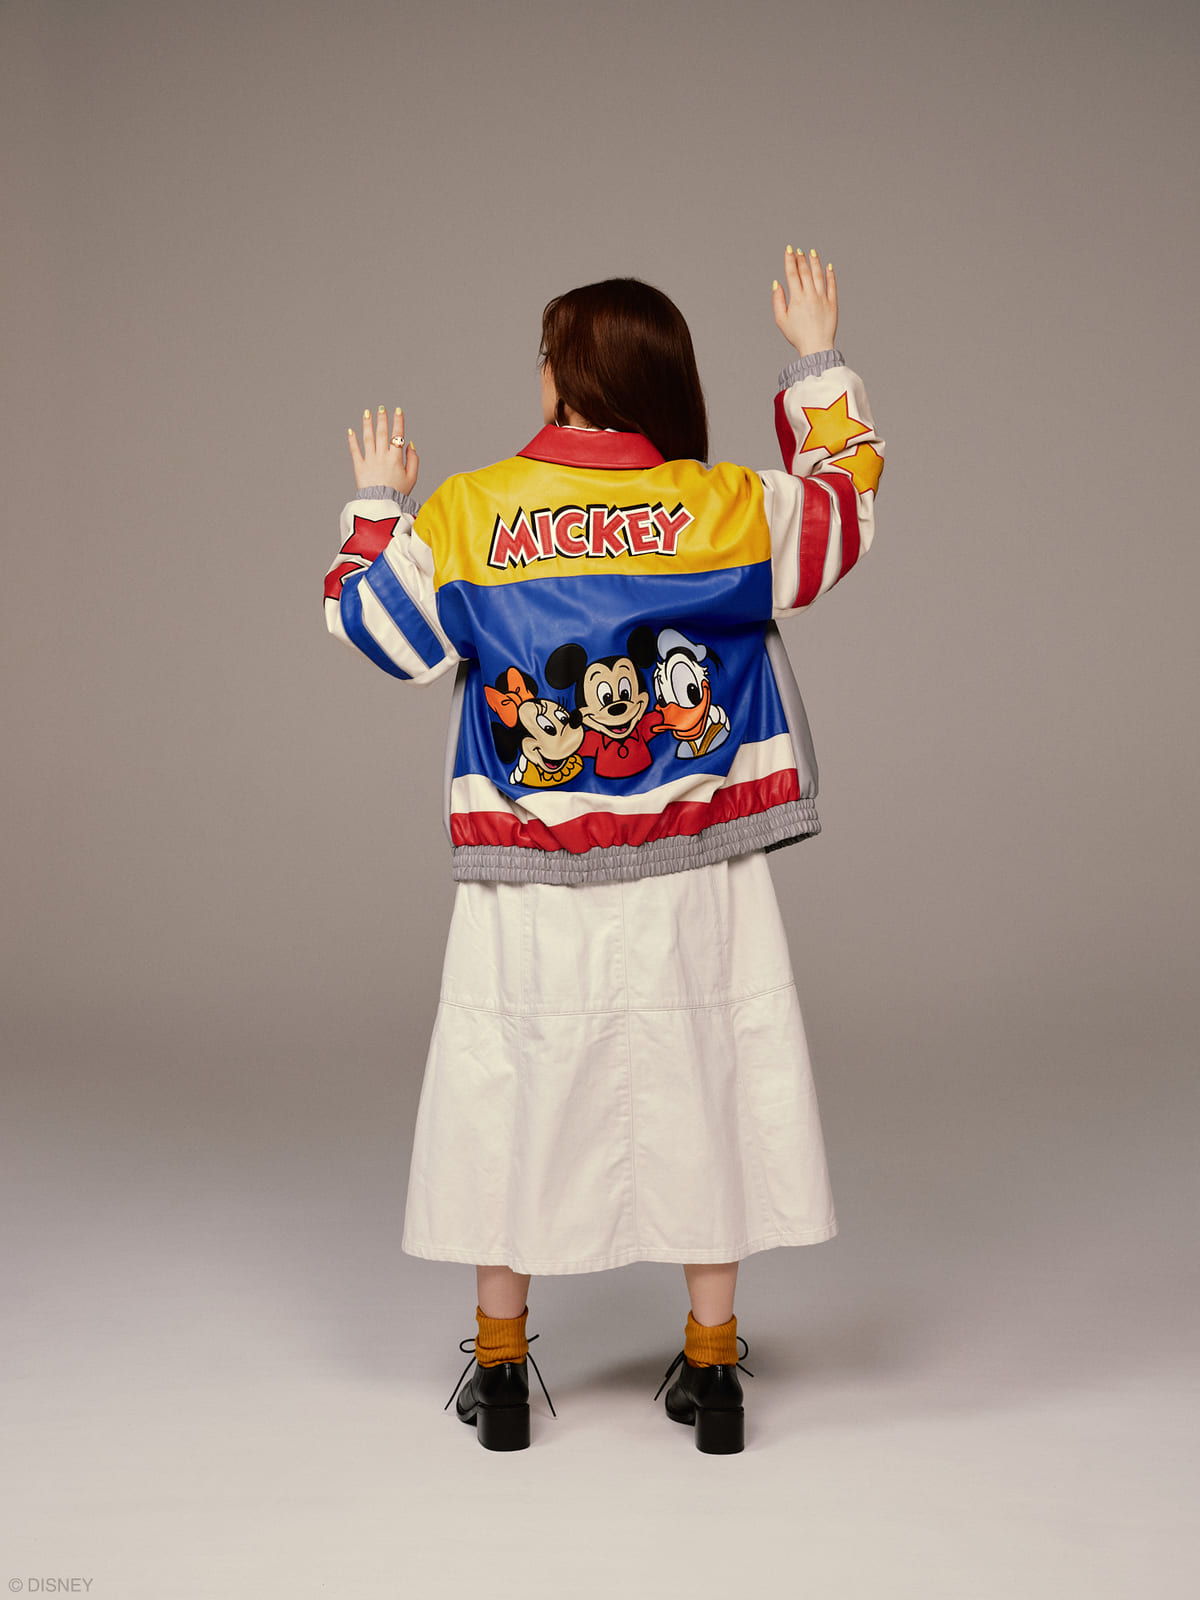 Disney SERIES CREATED by MOUSSY 2021 AUTUMN COLLECTION